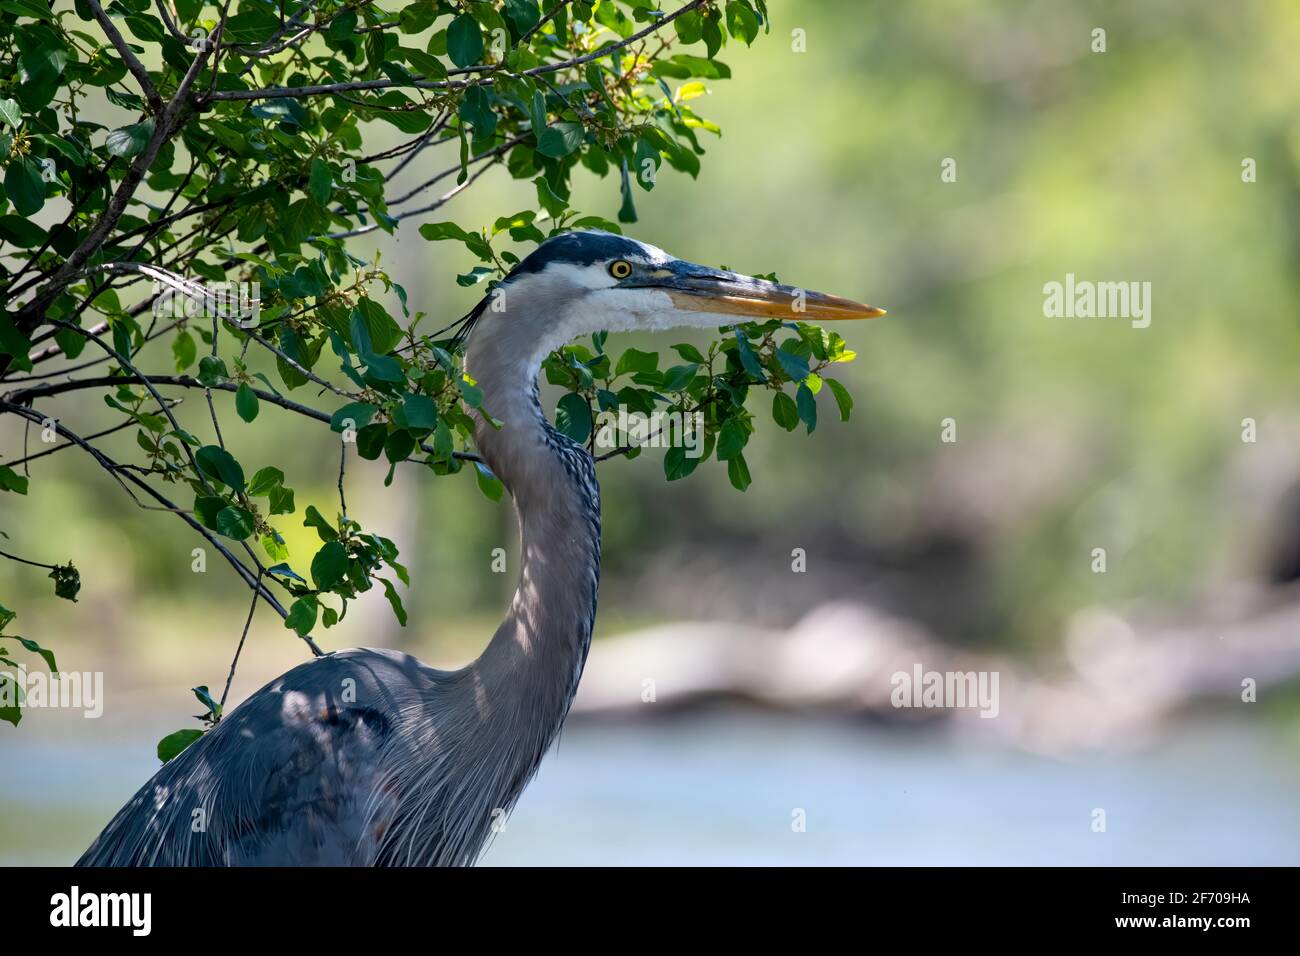 Great Blue Heron - Close-up of a great blue heron's neck and head while it stands by the river where it was fishing Stock Photo